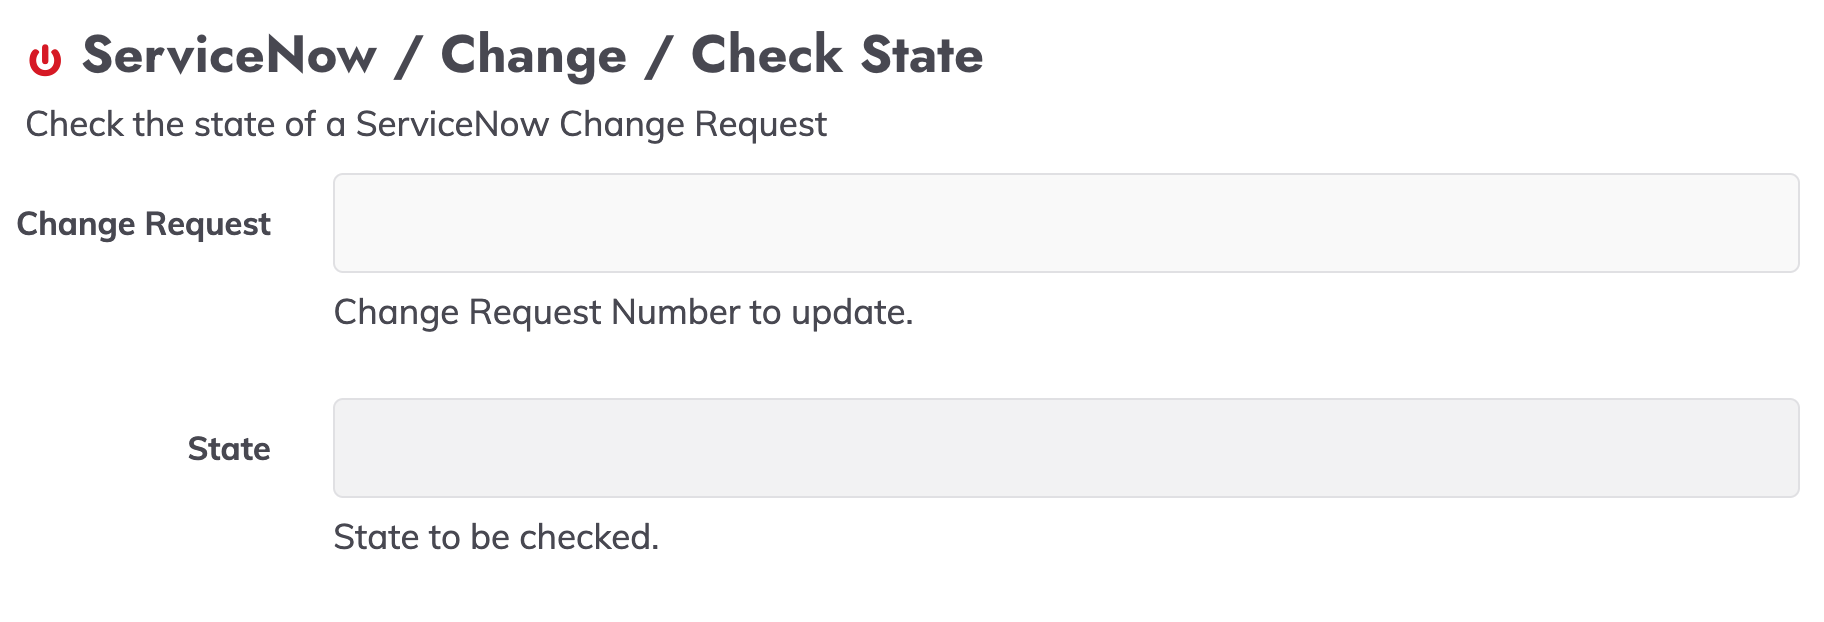 ServiceNow / Change / Check State